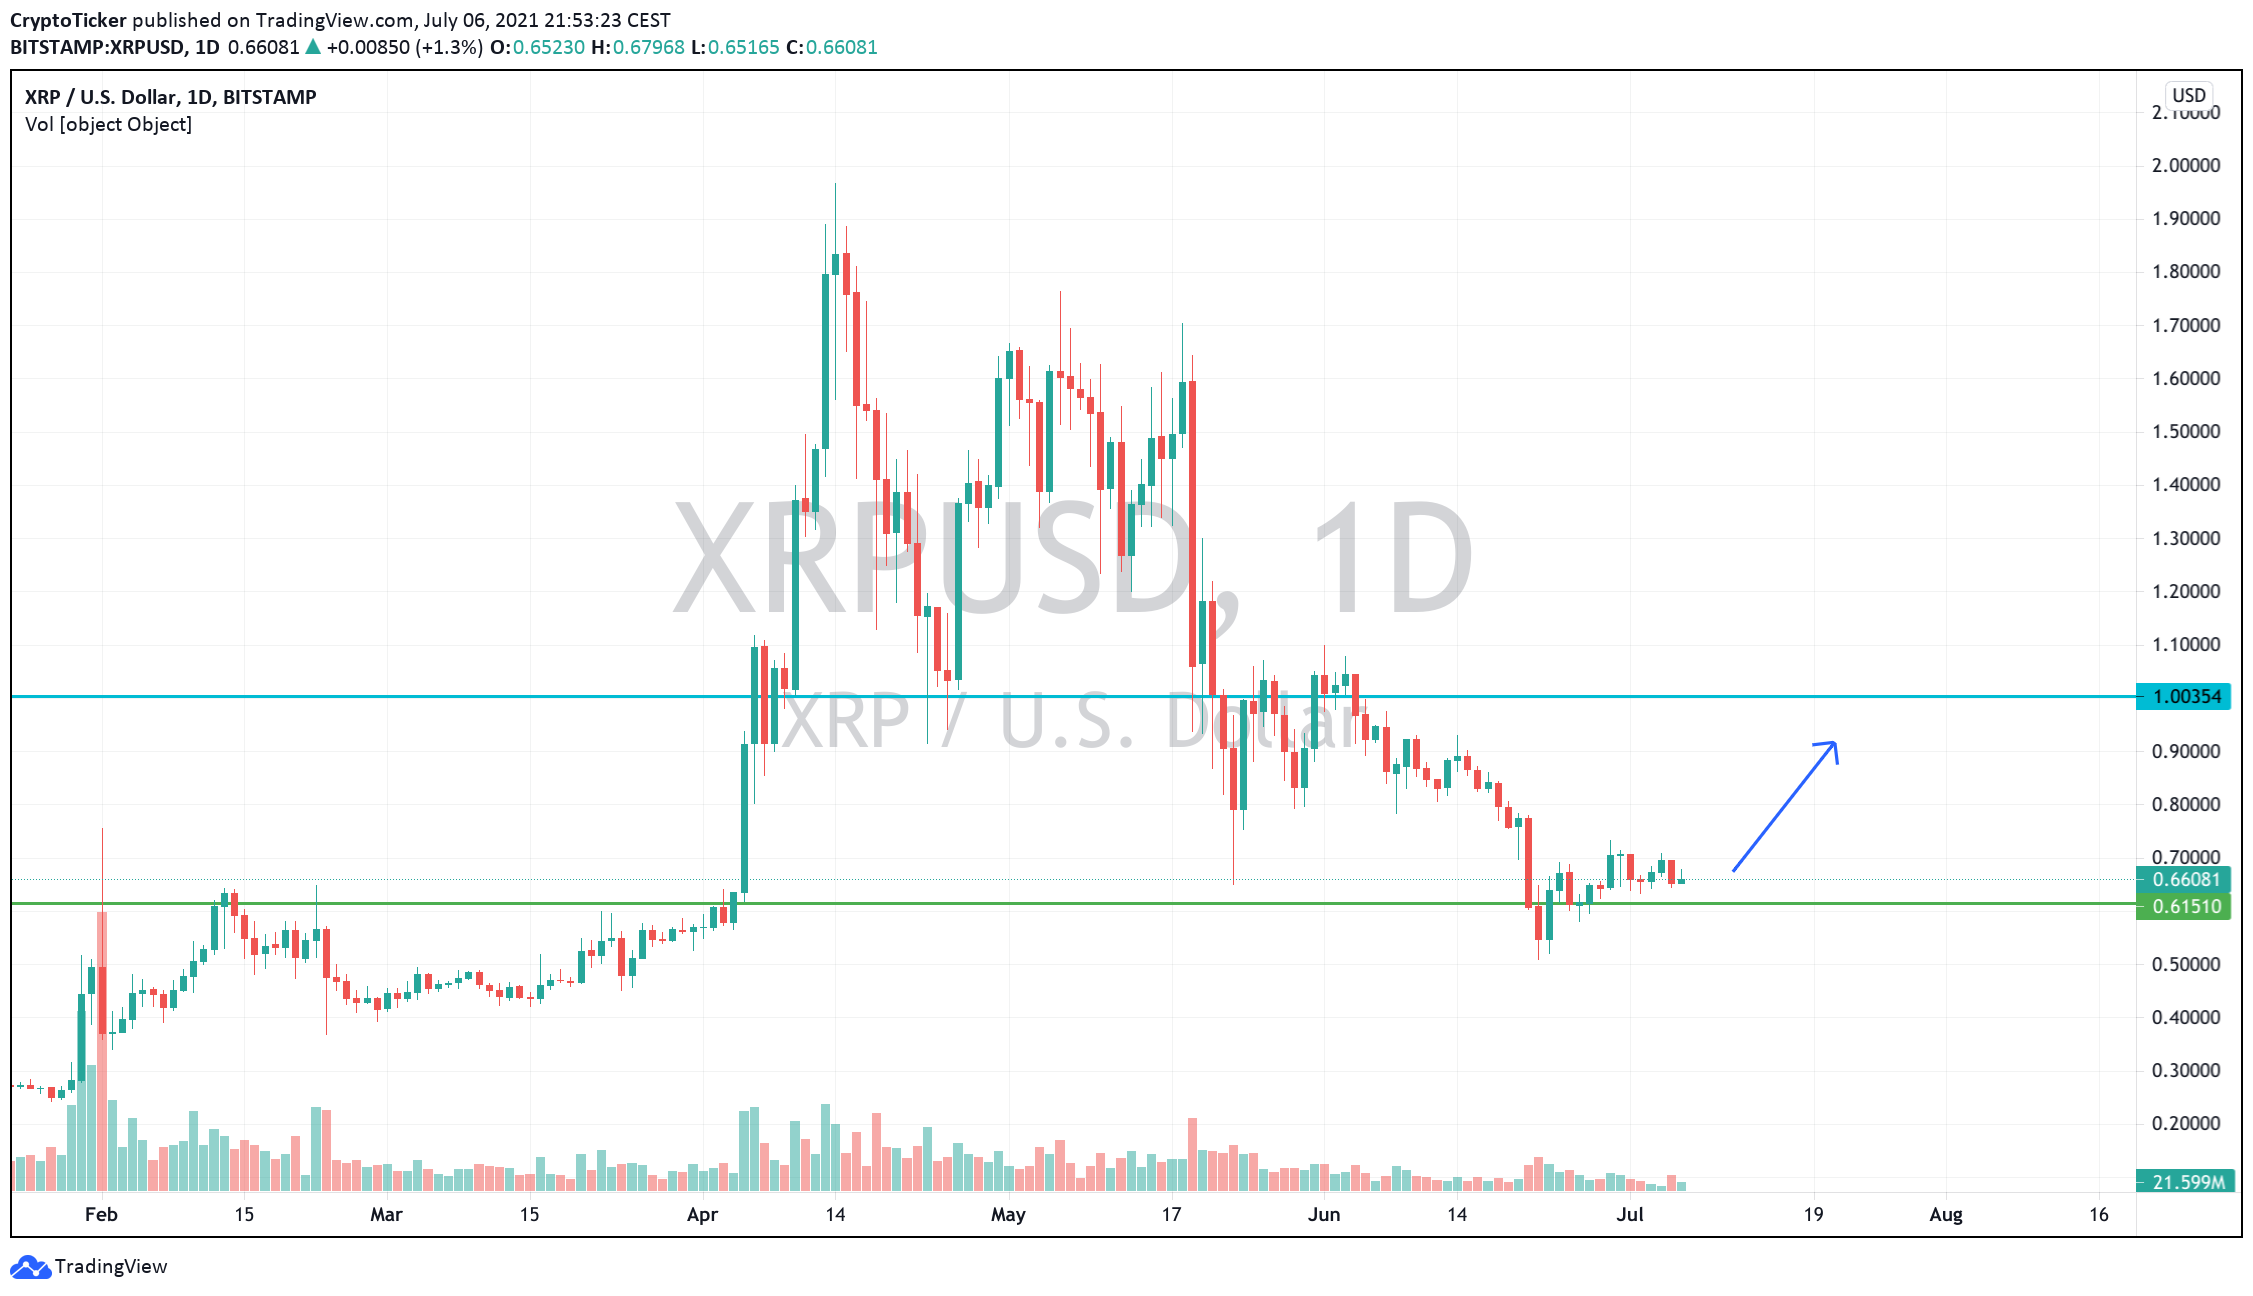 XRP/USD 1-day chart showing a promising uptrend to buy xrp